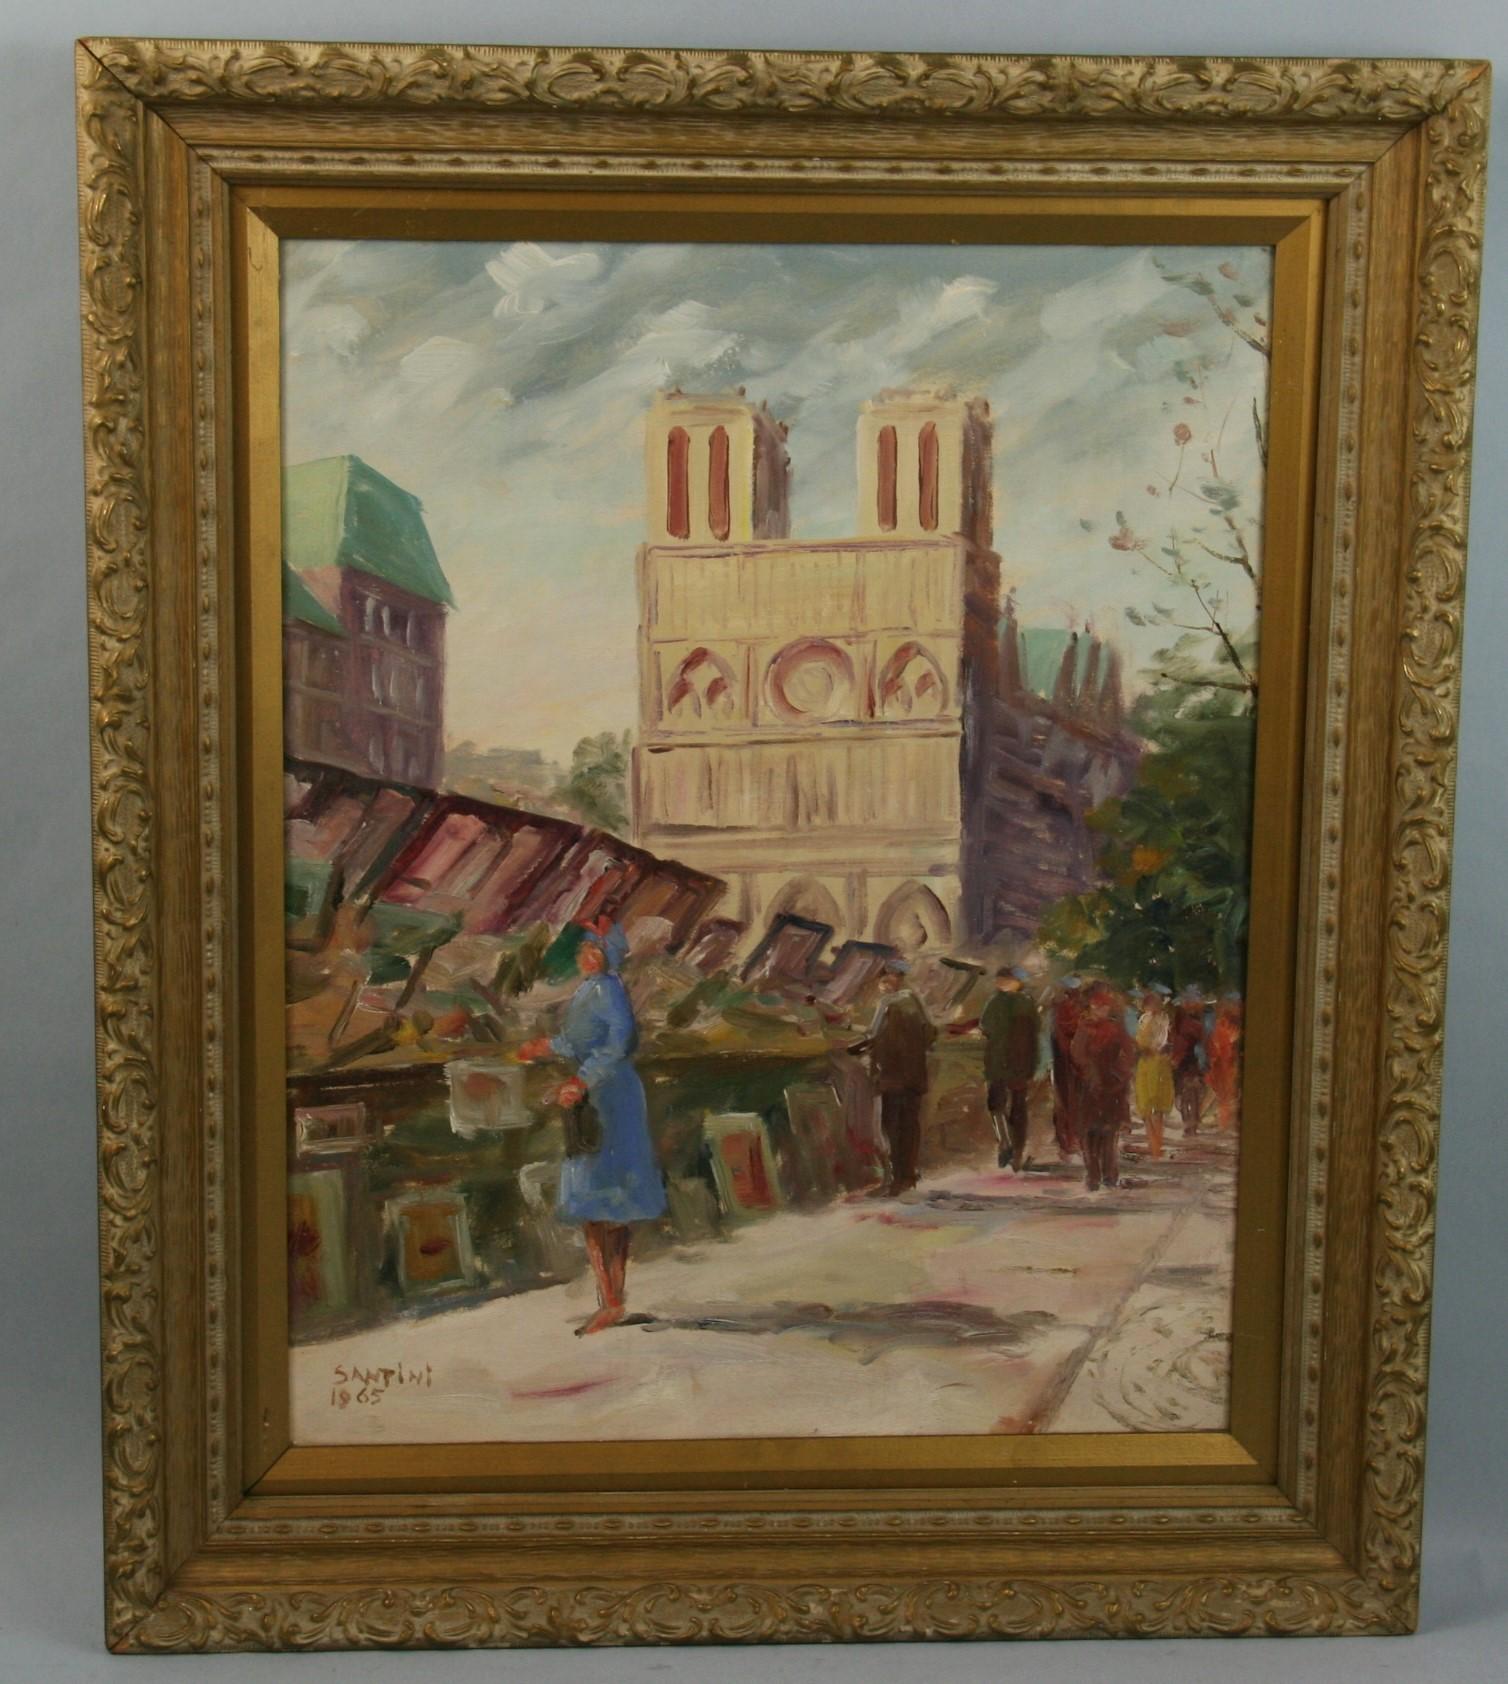 Vintage French Impressionist Paris  Book sellers  Notre Dame  1965 - Painting by Santini